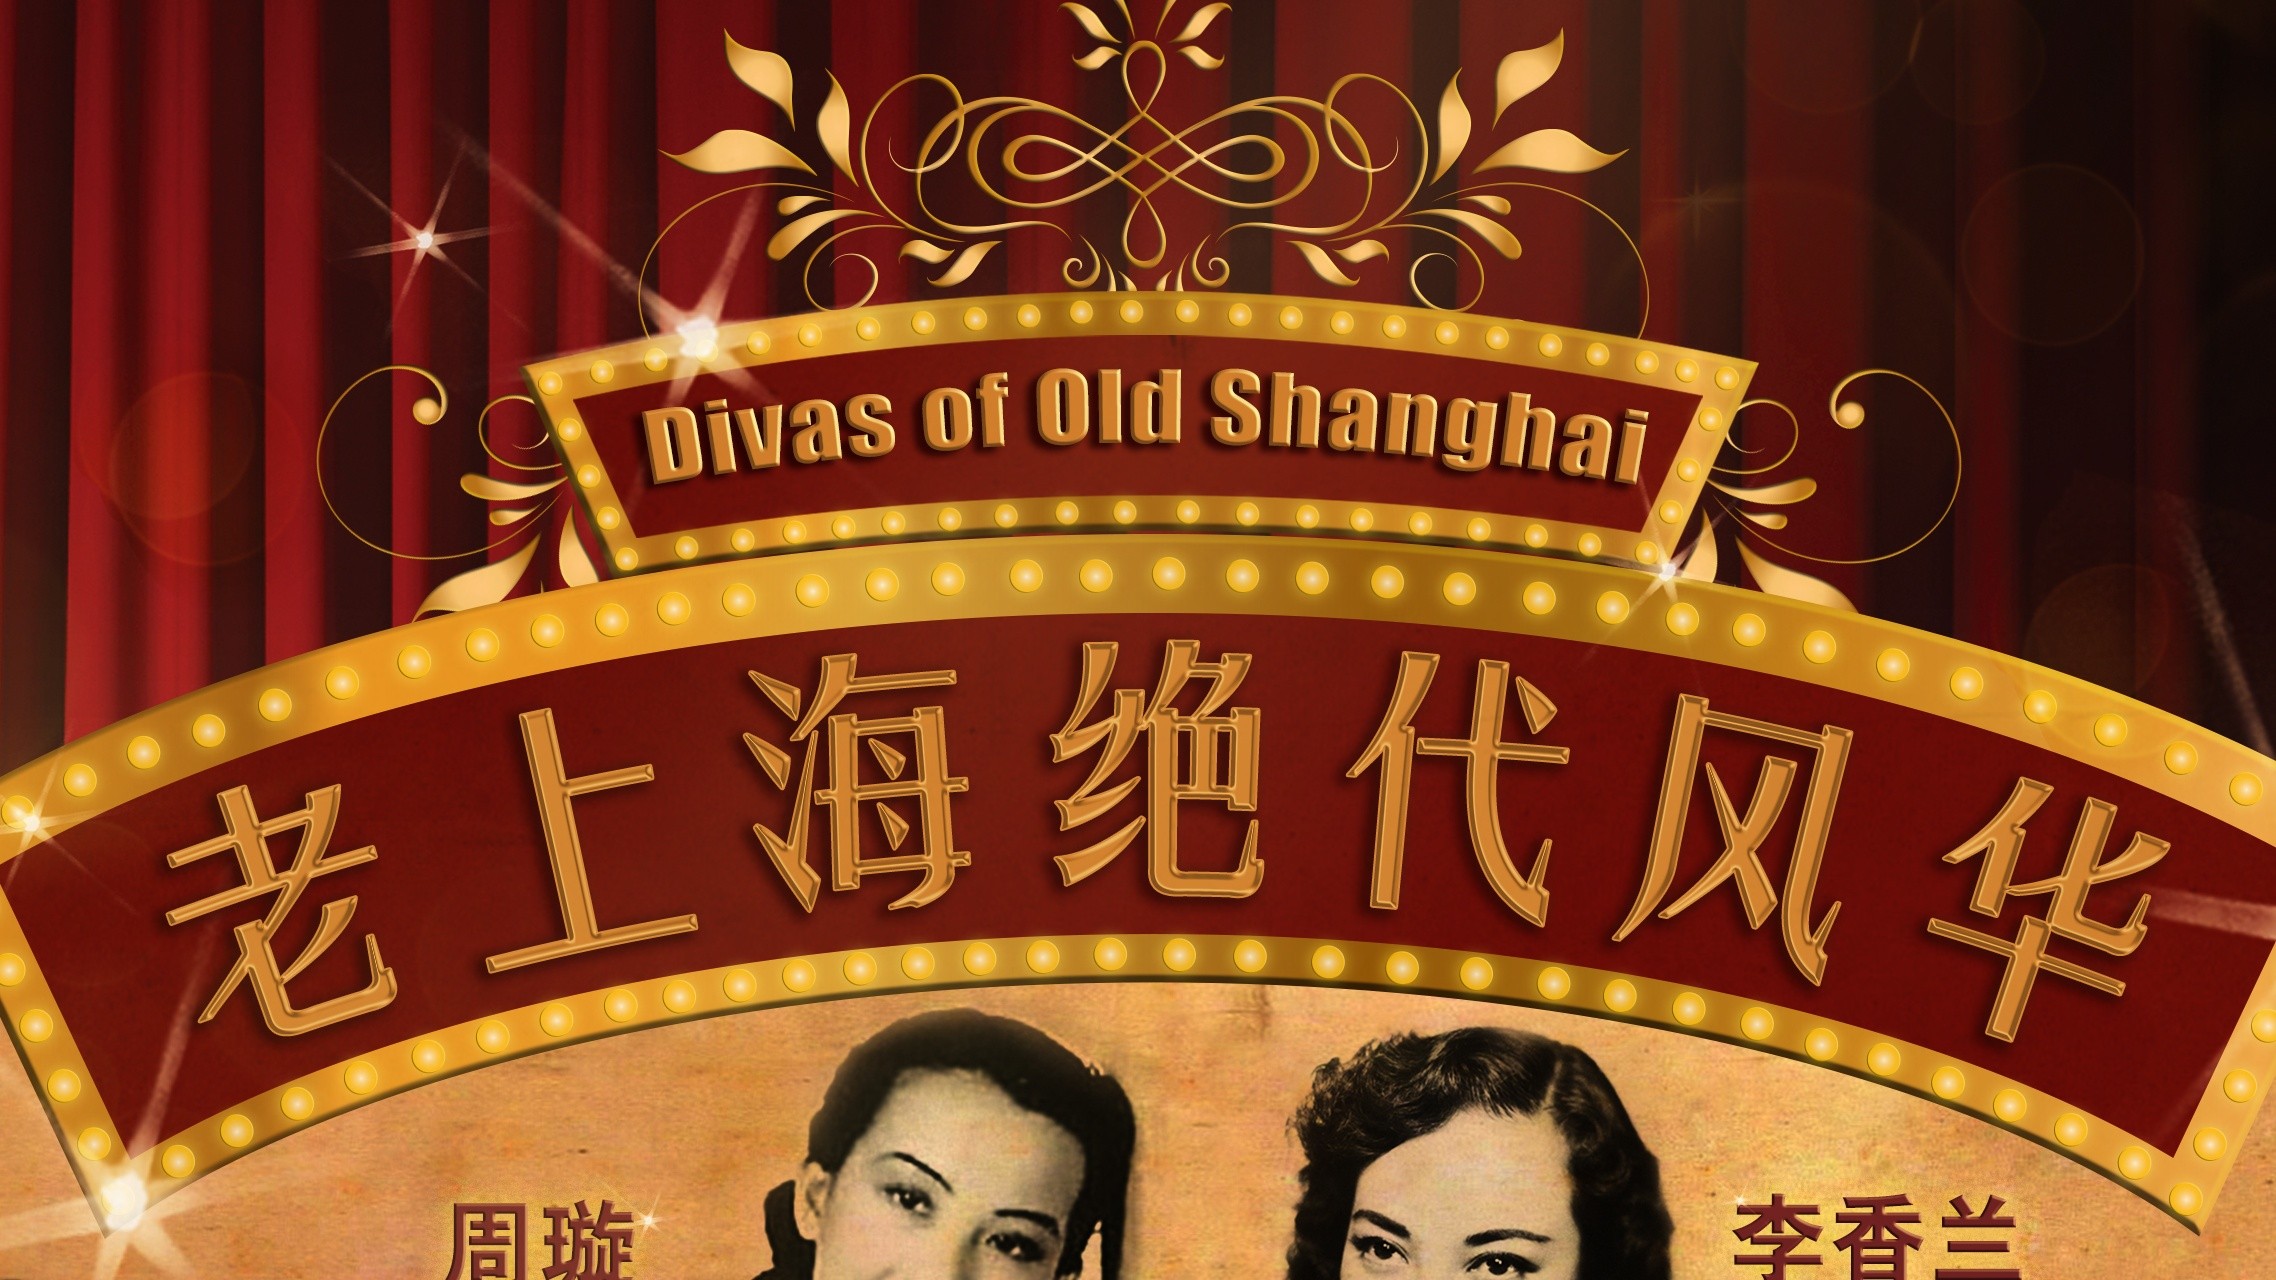 A Date with Friends - Divas of Old Shanghai